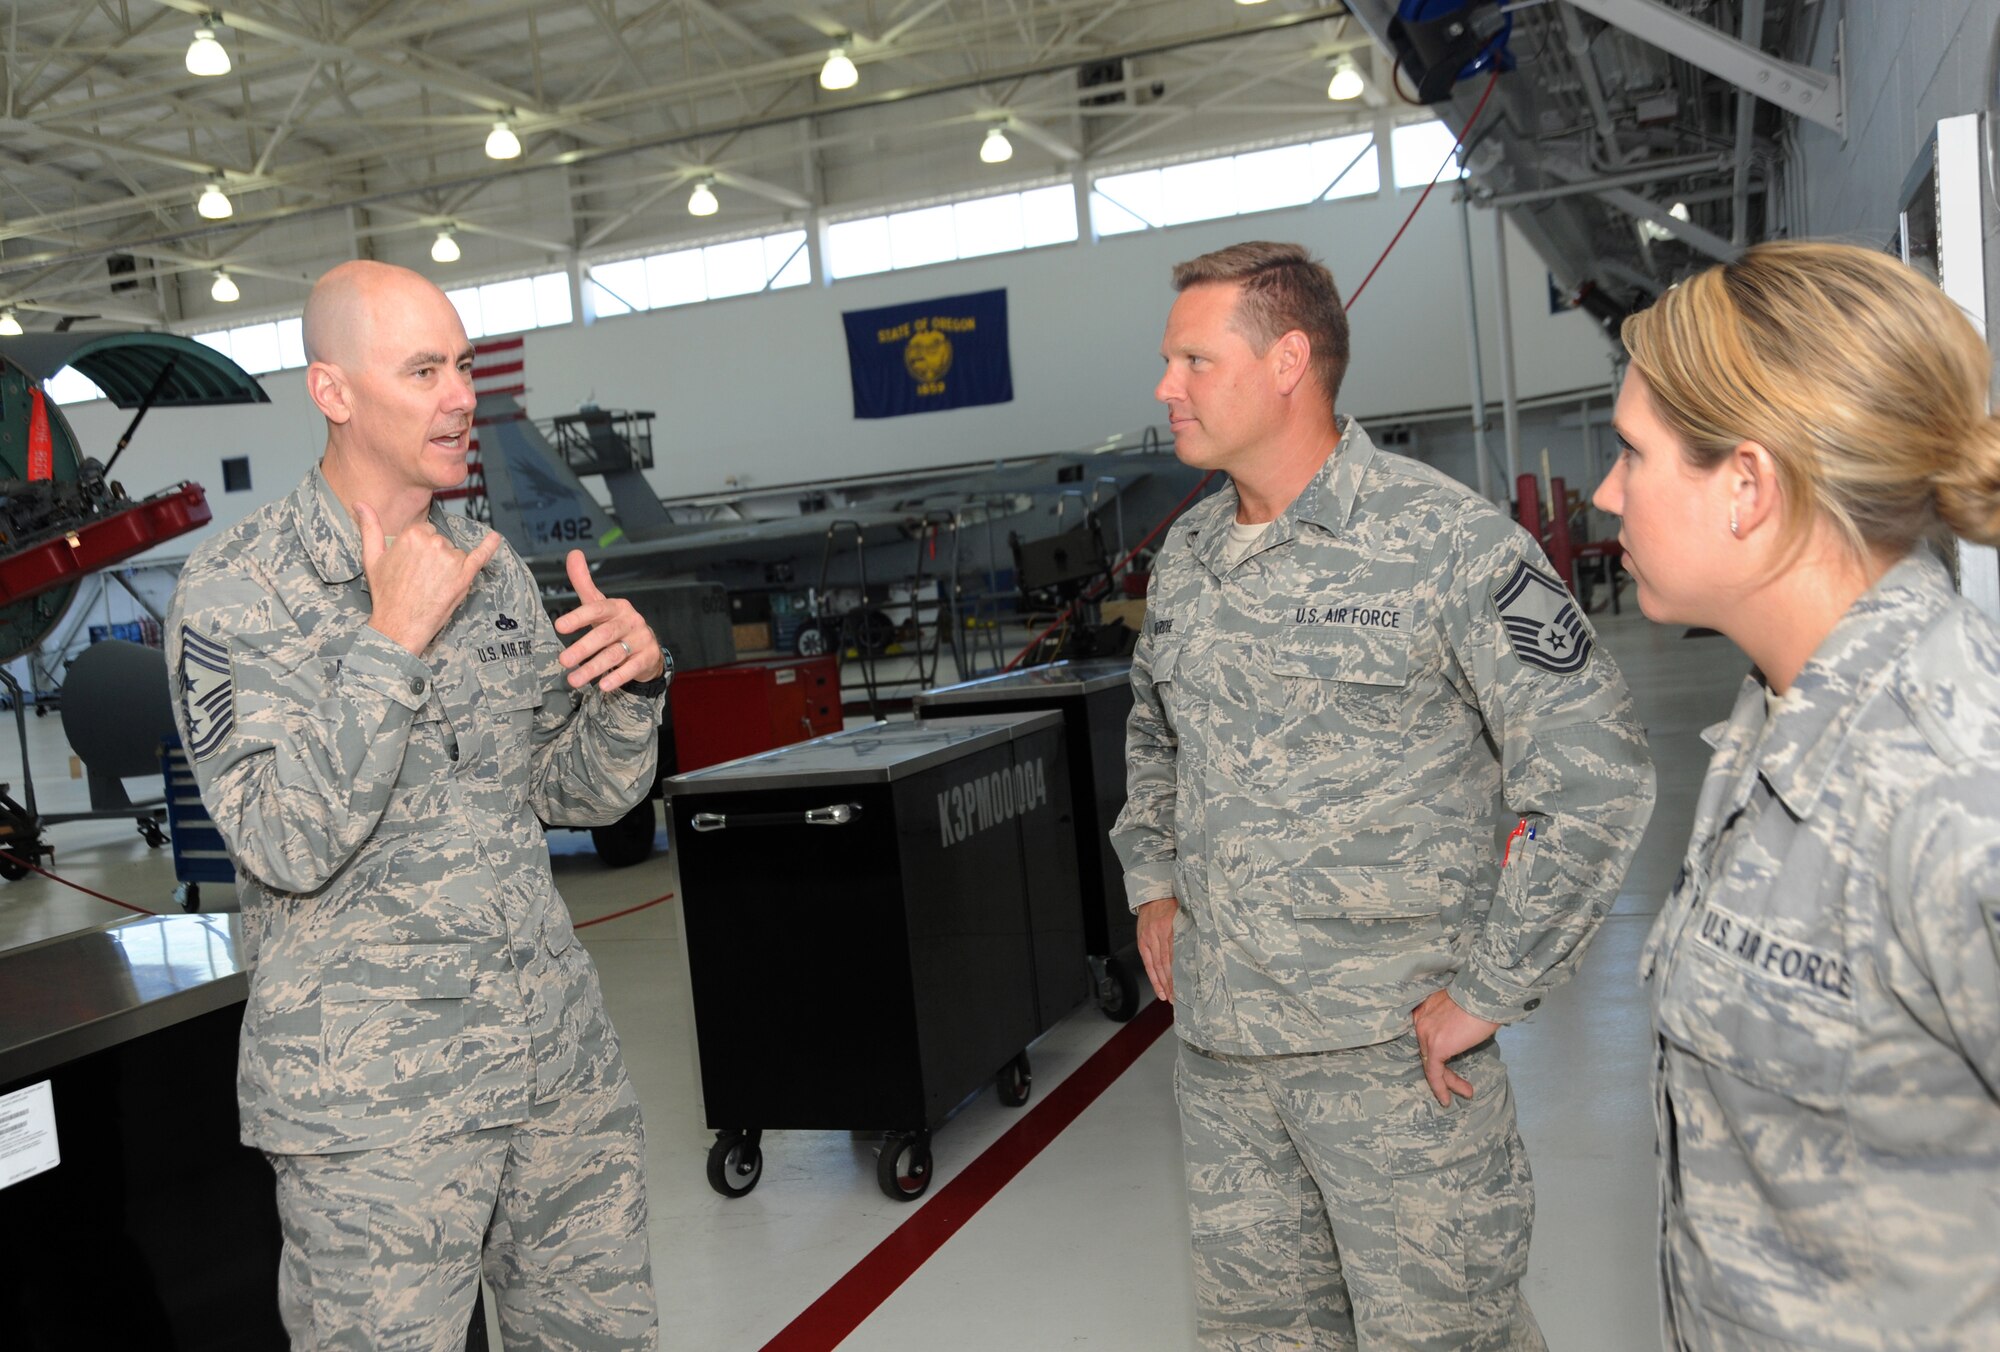 Ronald C. Anderson Jr., Command Chief Master Sgt., 1st Air Force, left, talks to Master Sgt. Landon Selfridge, center, and Staff Sgt. Jennifer Anderson, right, of the 142nd Fighter Wing Maintenance Group, during his tour of the Portland Air National Guard Base, Ore., June 10, 2014. (Air National Guard photo by Tech. Sgt. John Hughel, 142nd Fighter Wing Public Affairs/Released)